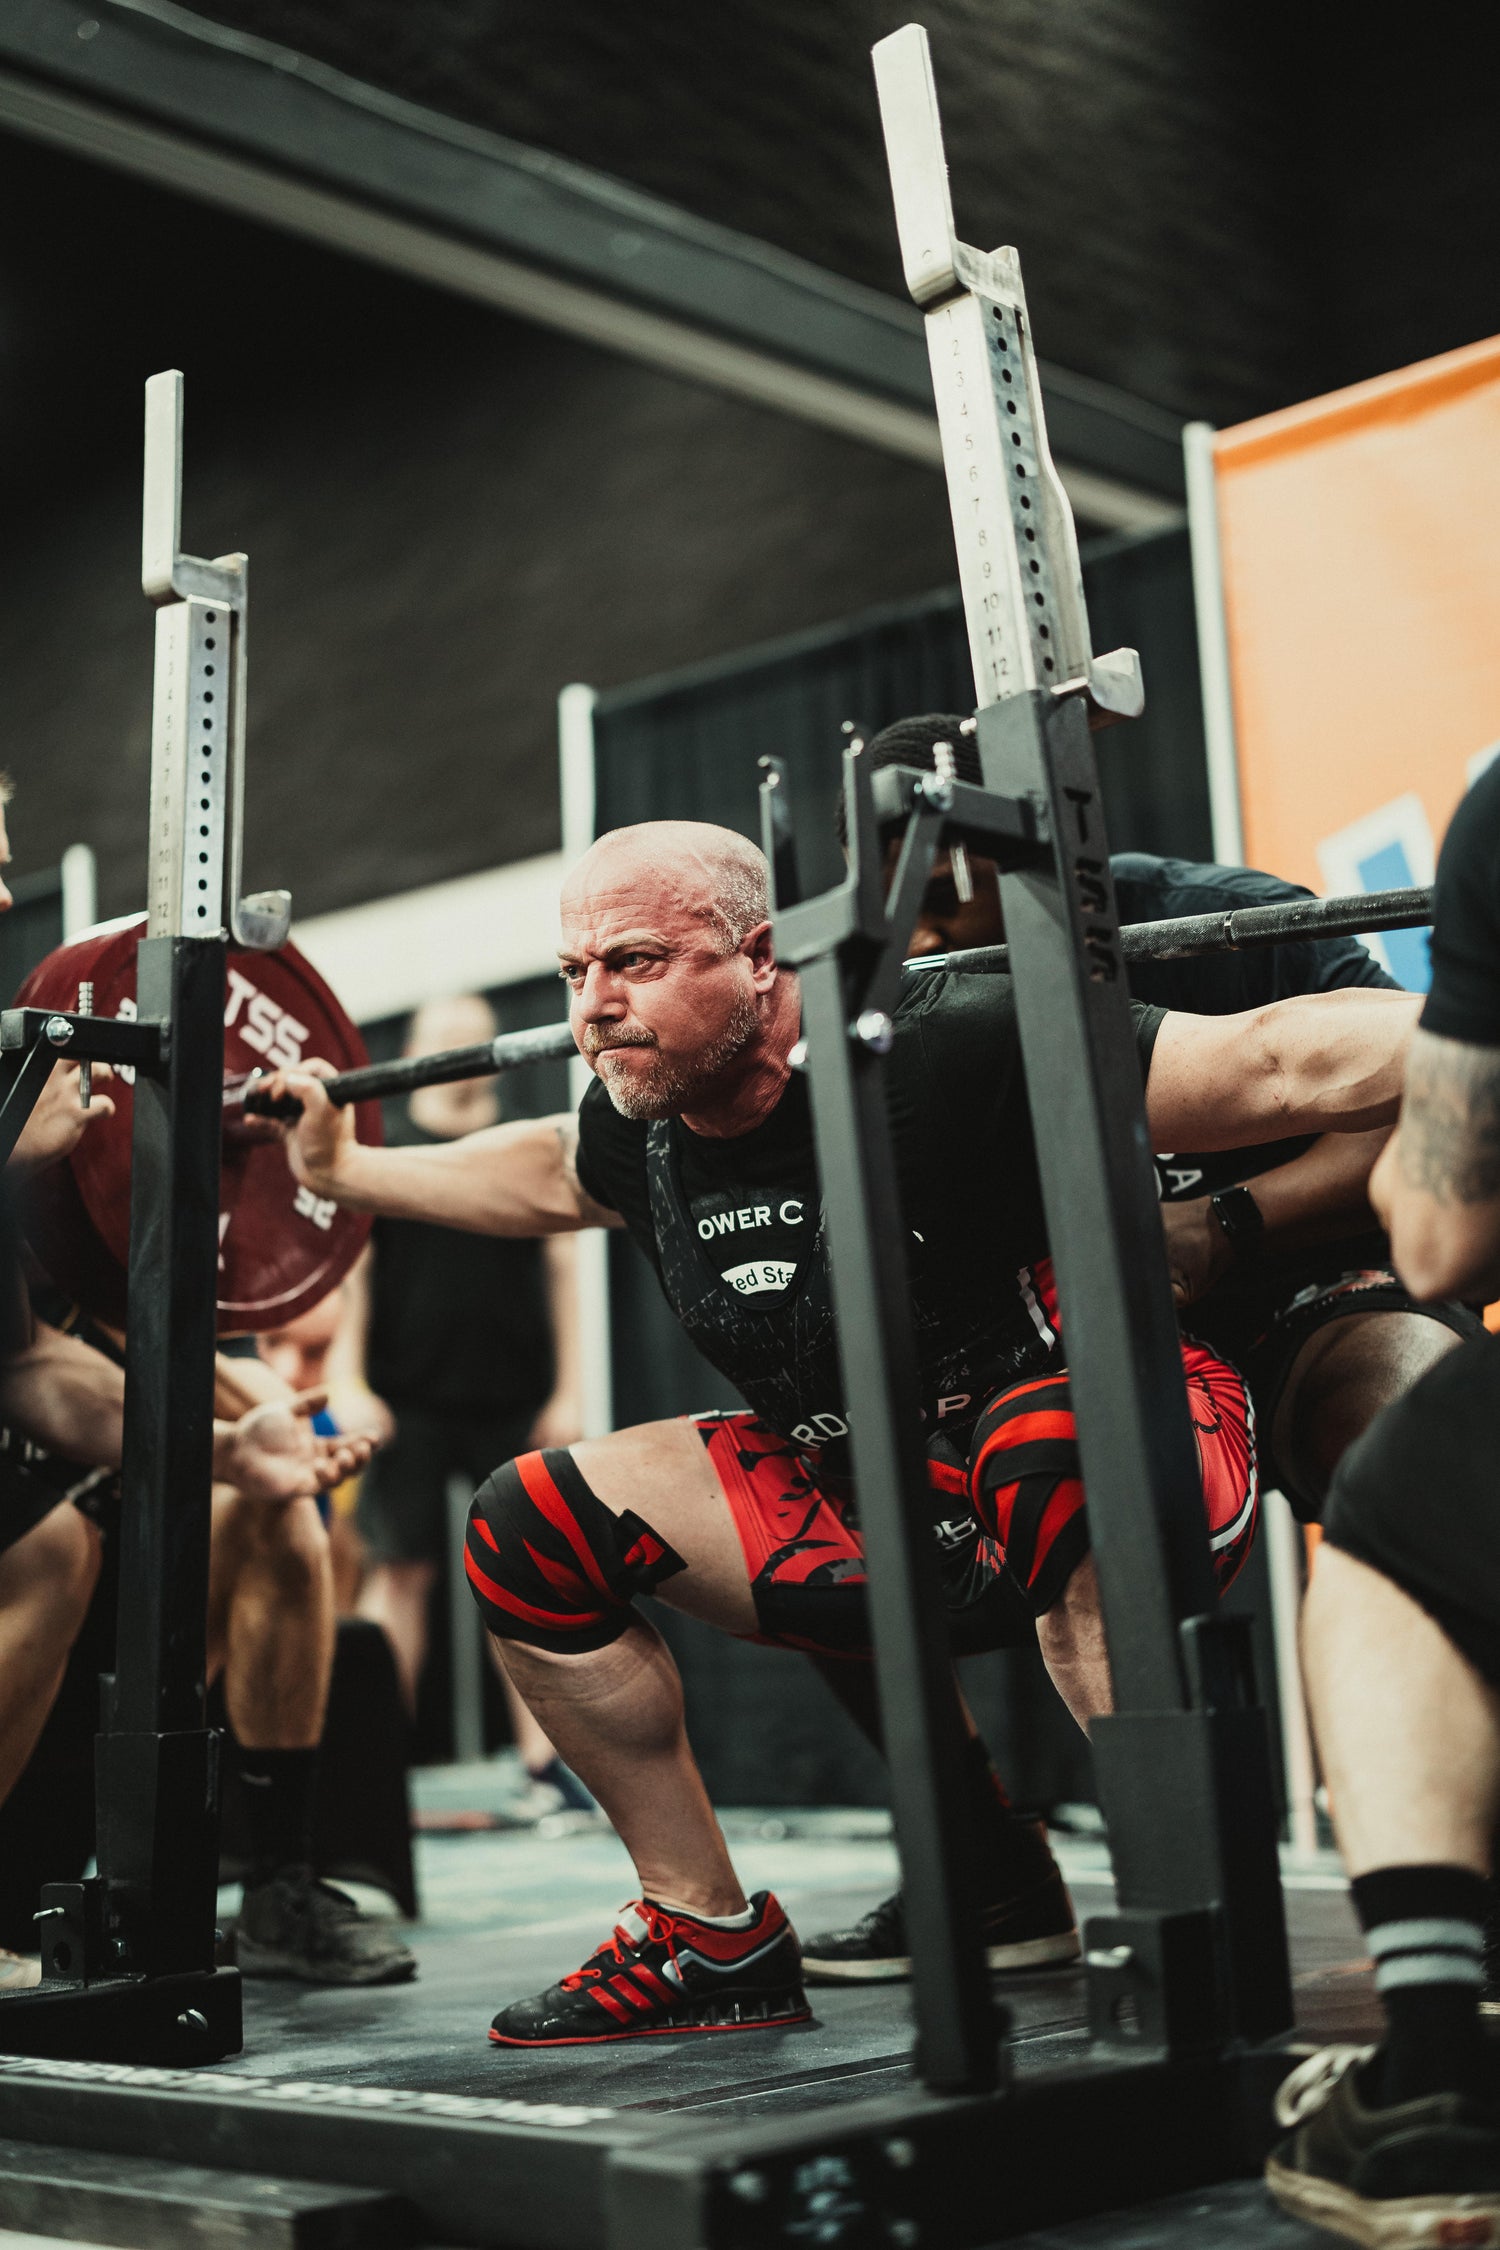 Game Day Knee Wraps. When you are ready for a HUGE Squat PR or you're ready to SMASH the platform, try DRIVEN's GAME DAY Knee Wraps for that incredible knee support and rebound out of the hole